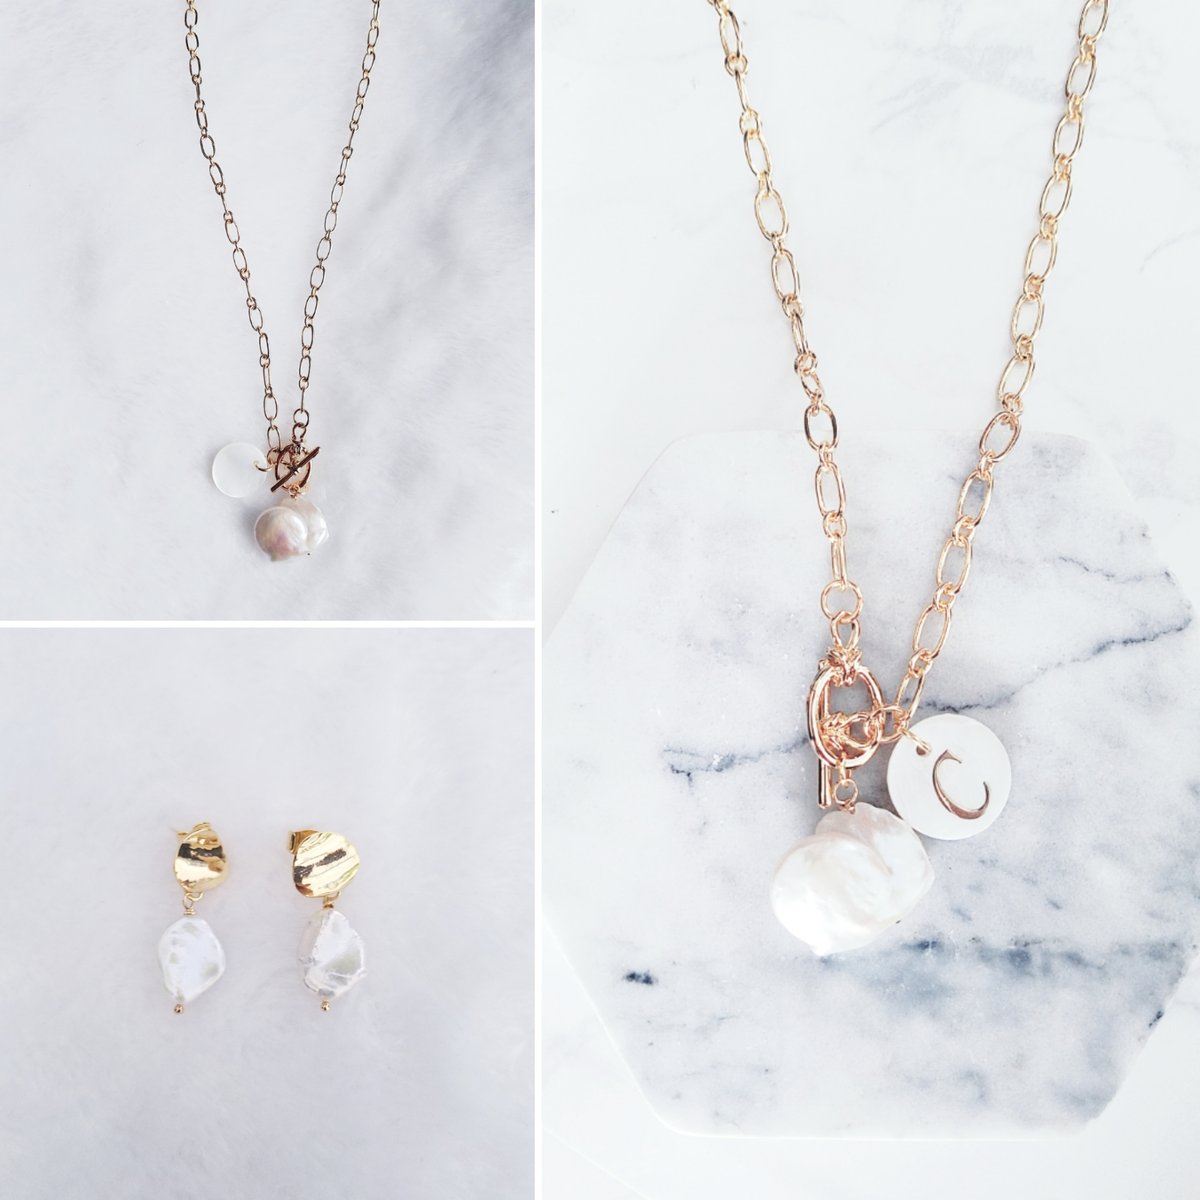 Keshi pearls and initial necklace and earrings | EOJewellerybyT